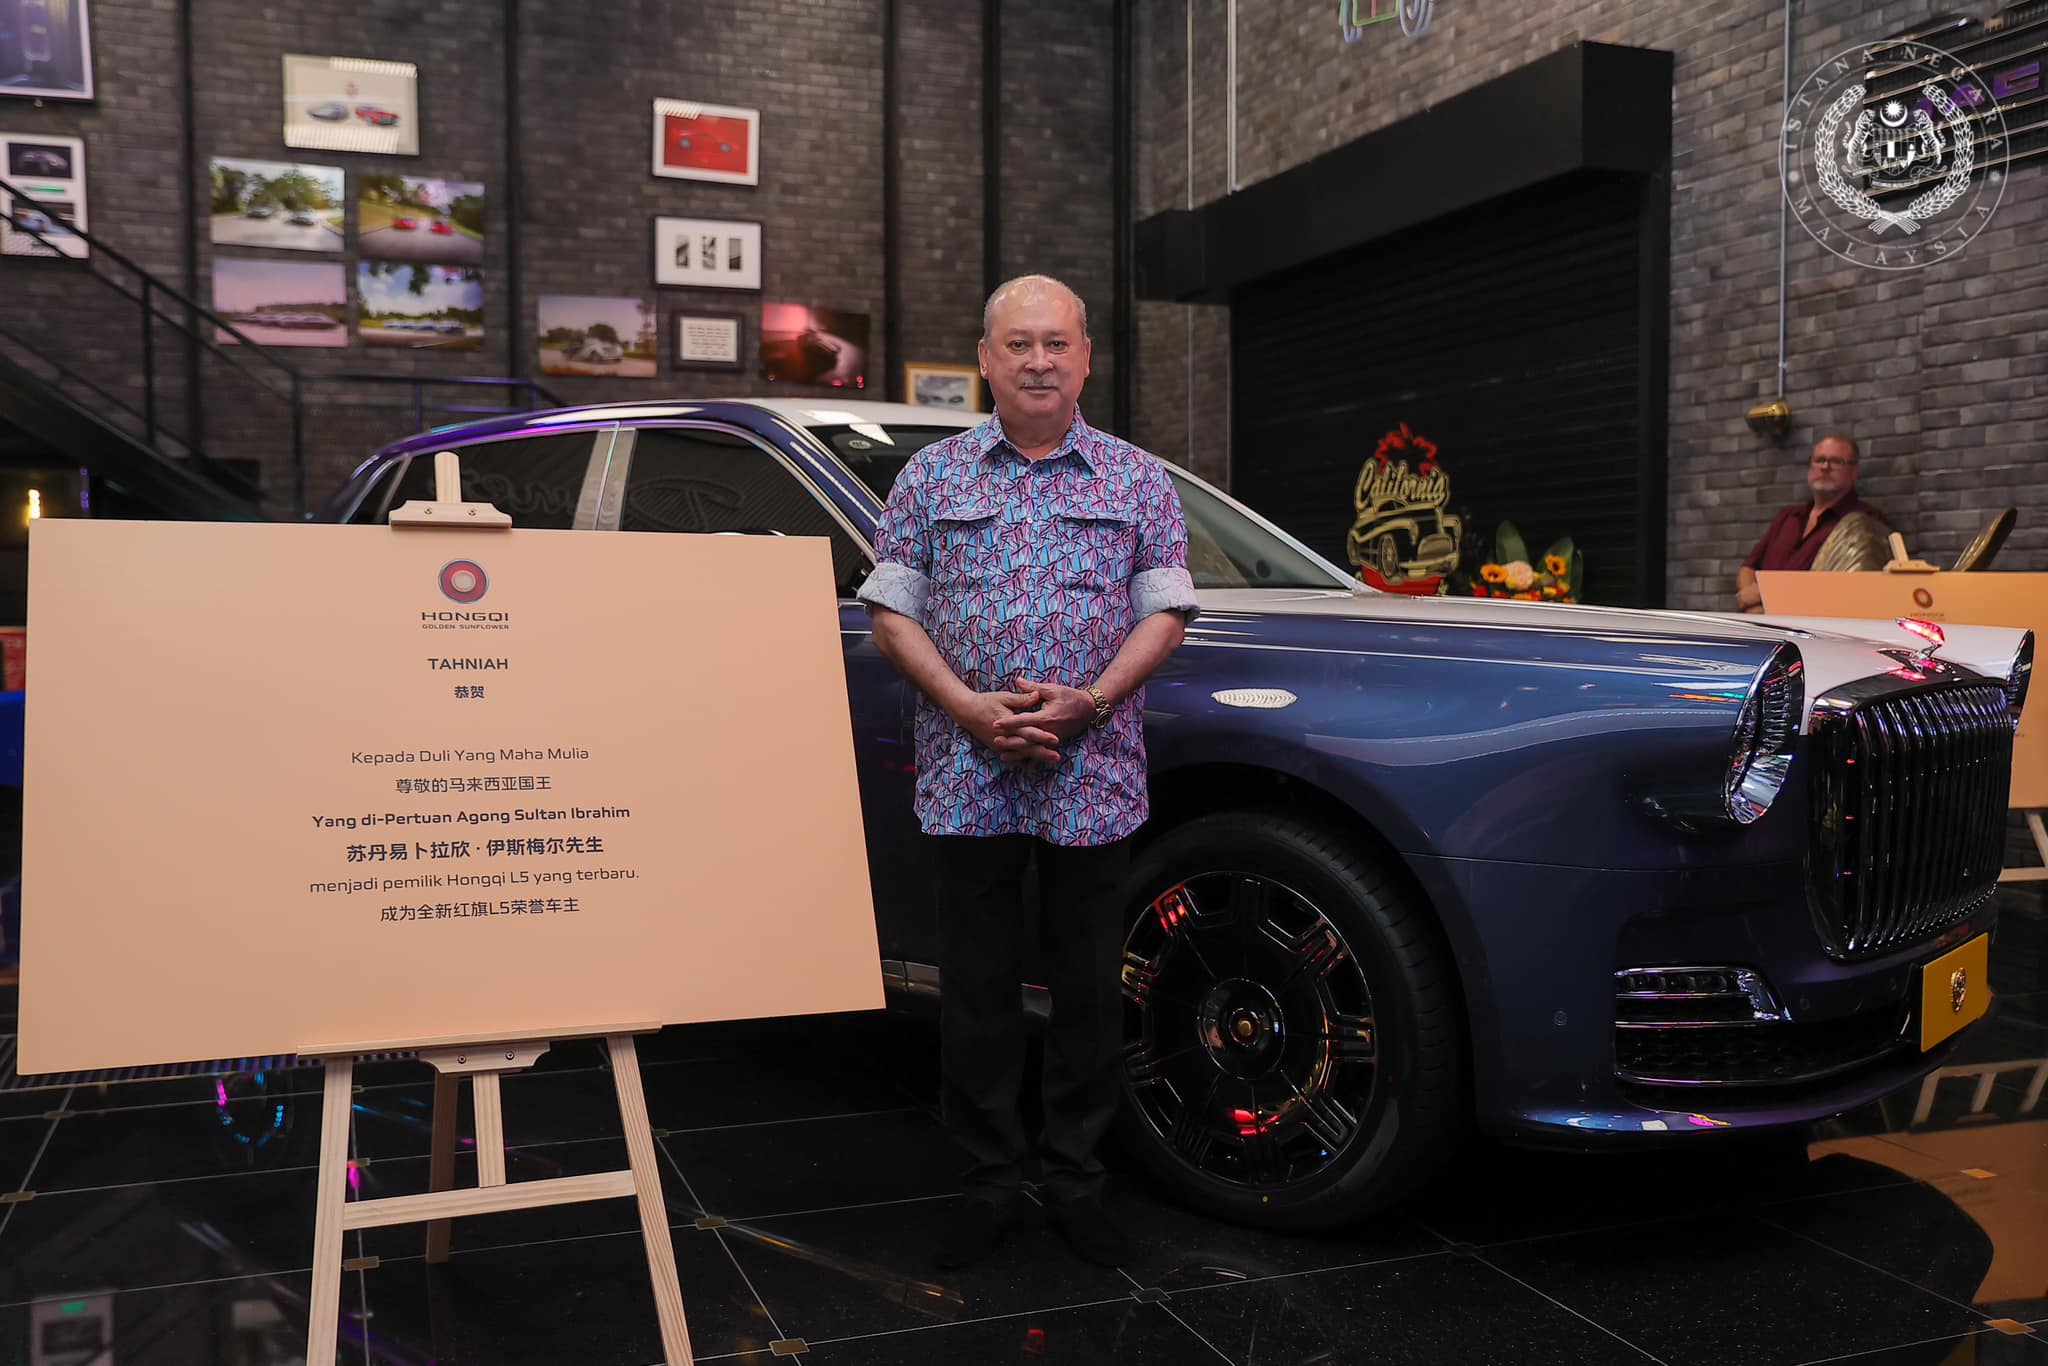 Sultan ibrahim with his new car